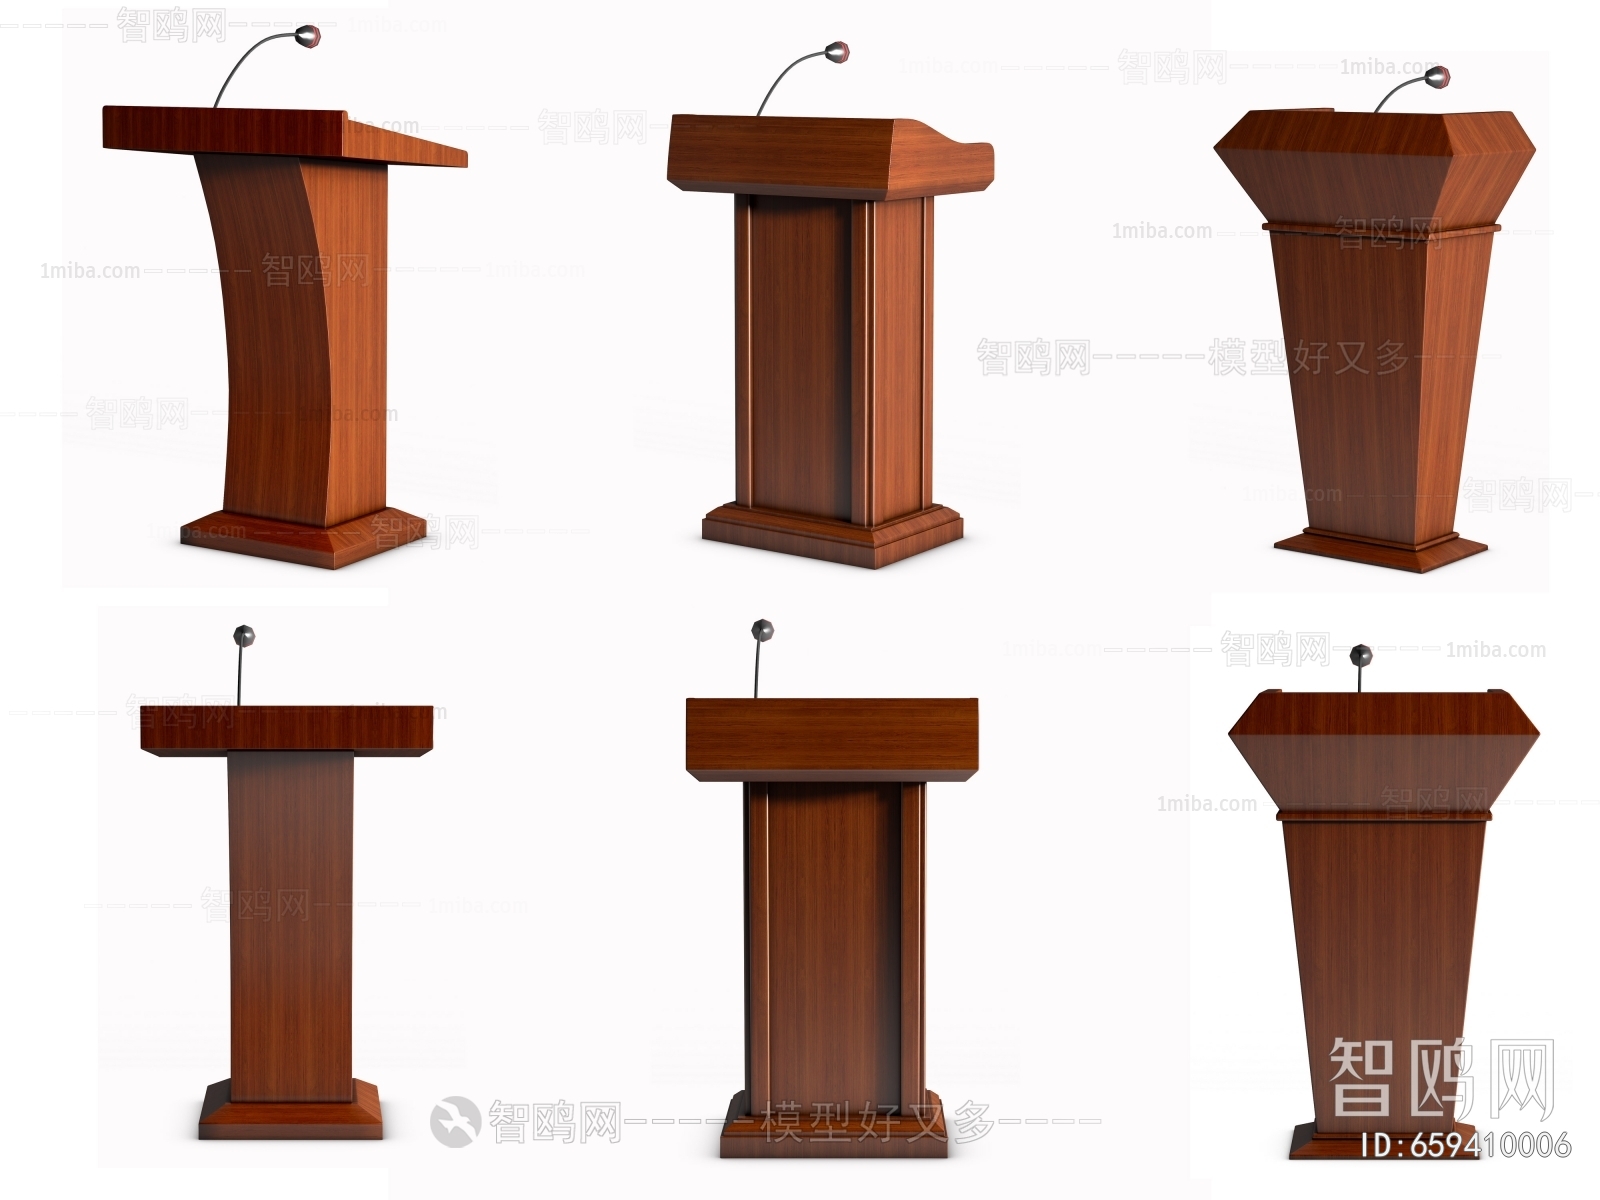 New Chinese Style Rostrum/Lecture Table